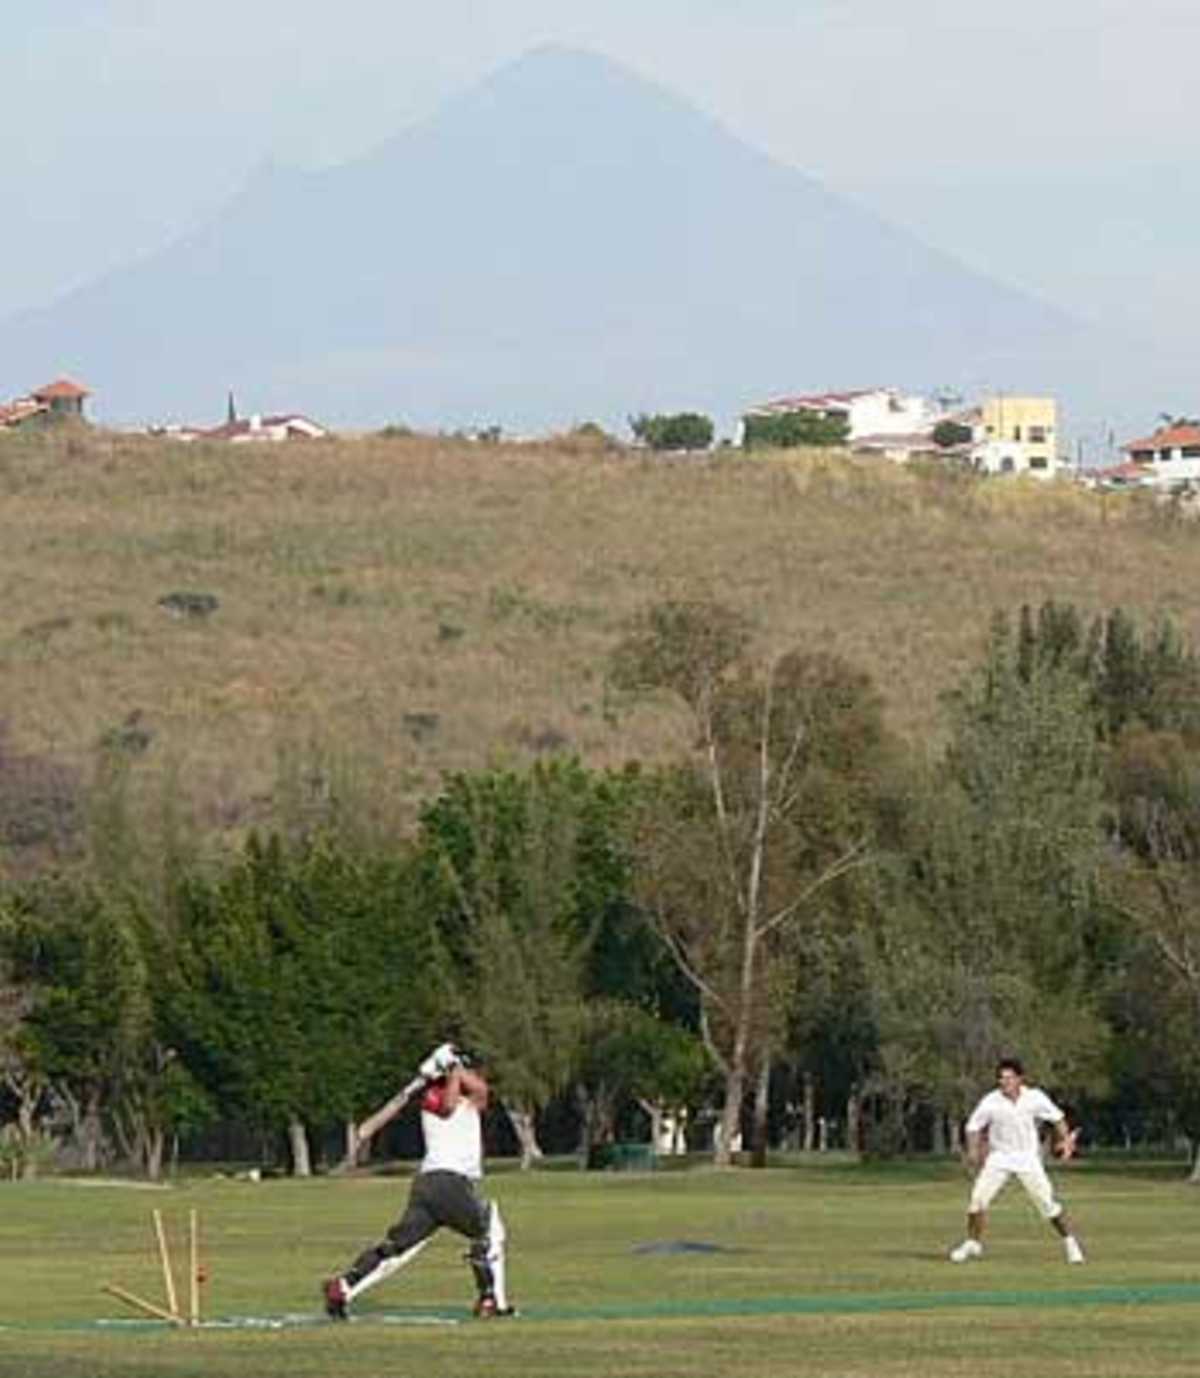 Cricket in Mexico in the town of Oaxtepec with a volcano, Volcan Popocatepet, smouldering in the background